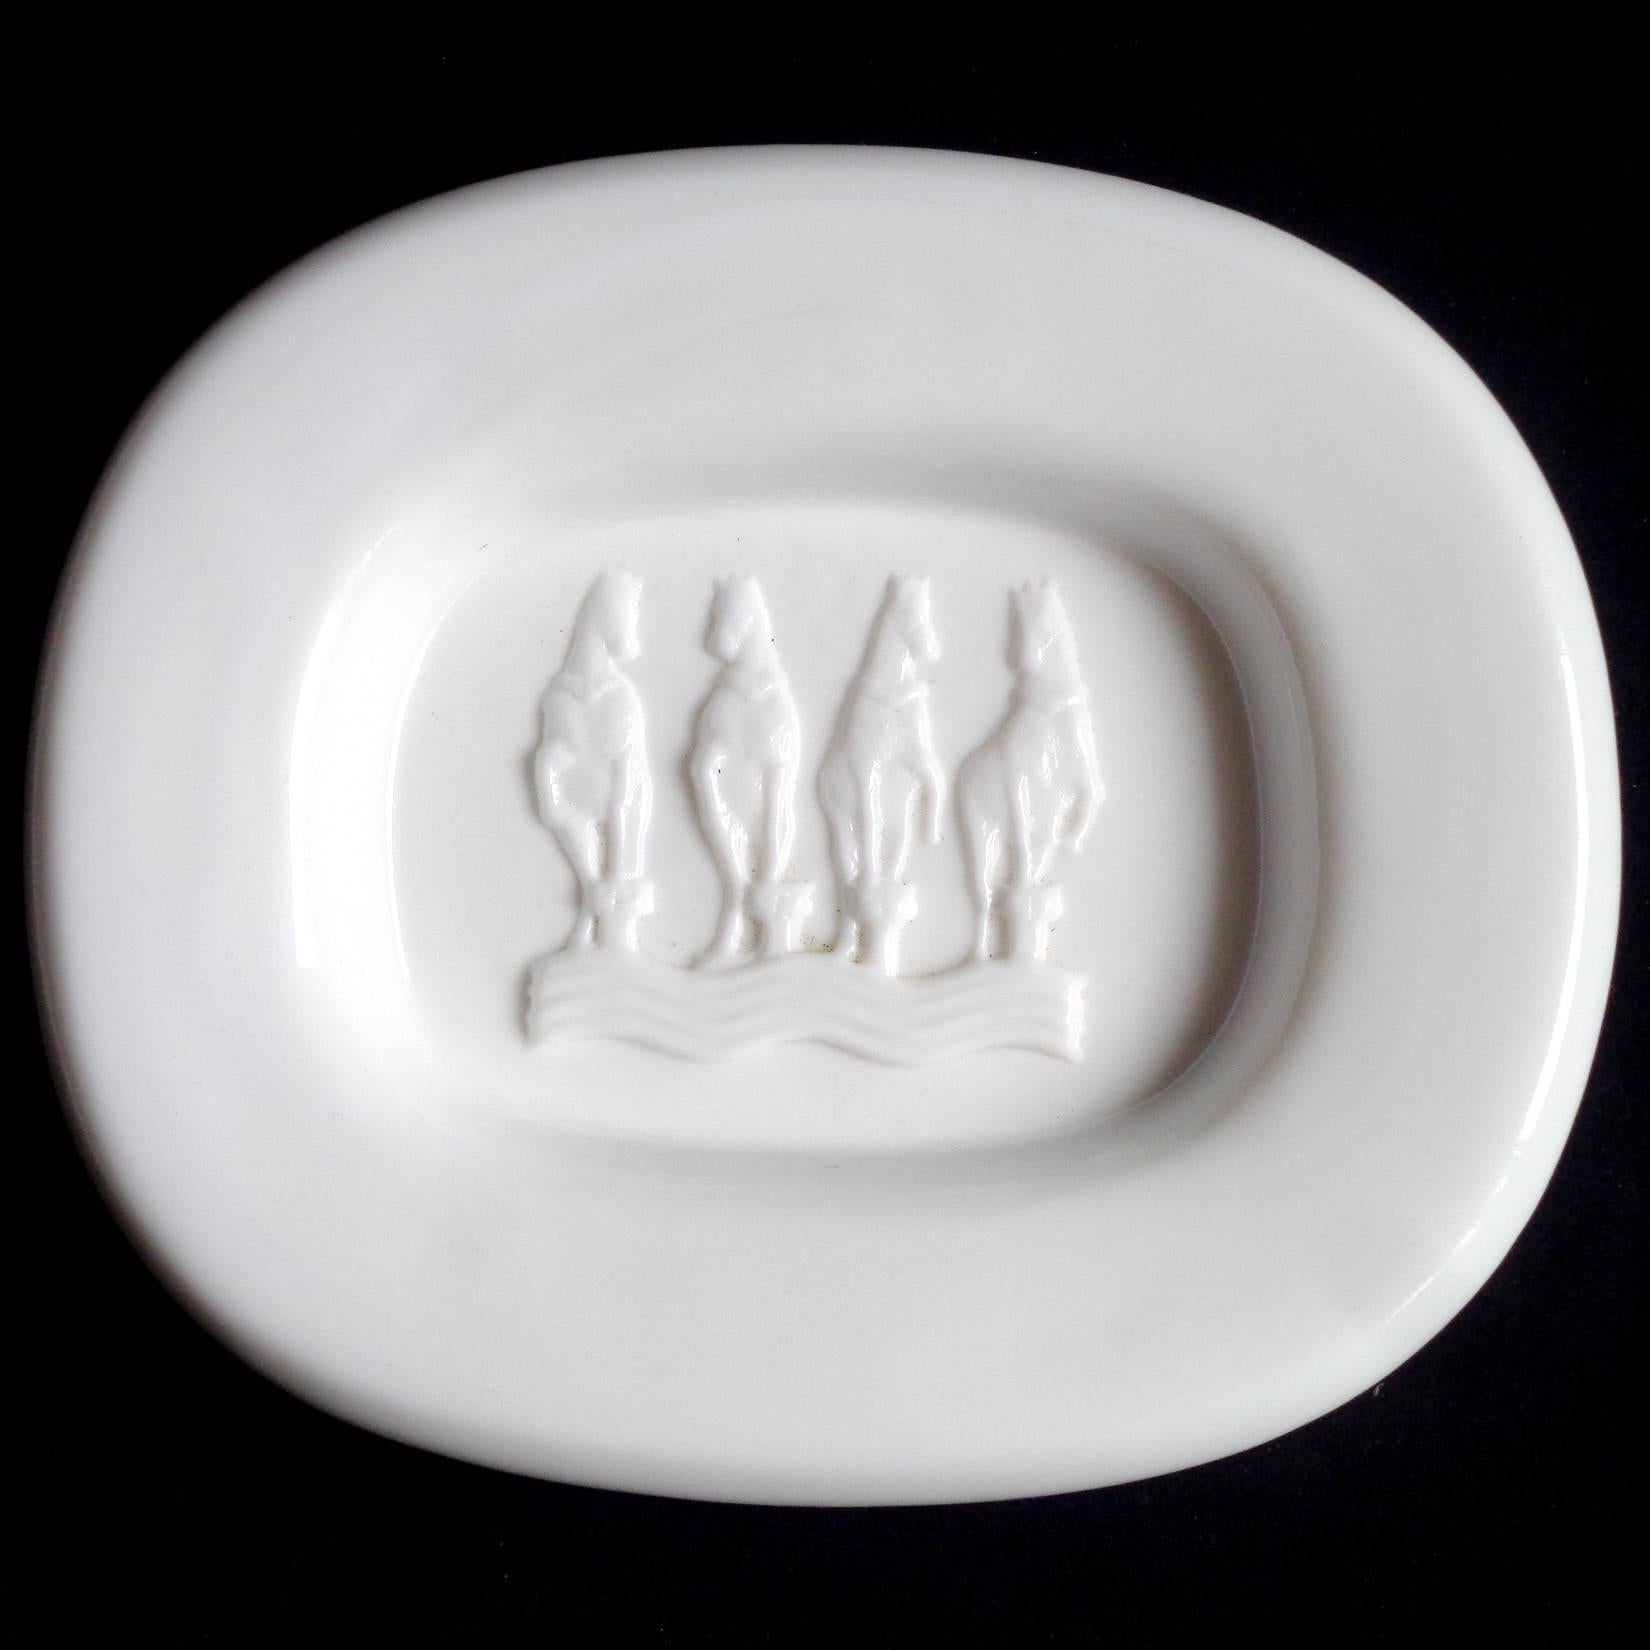 Beautiful vintage Murano hand blown white Italian decorative art glass bowl with 4 embossed rearing horses. Documented to designer Livio Seguso. I have previously owned several others with the original Live Seguso label on them. The piece was likely